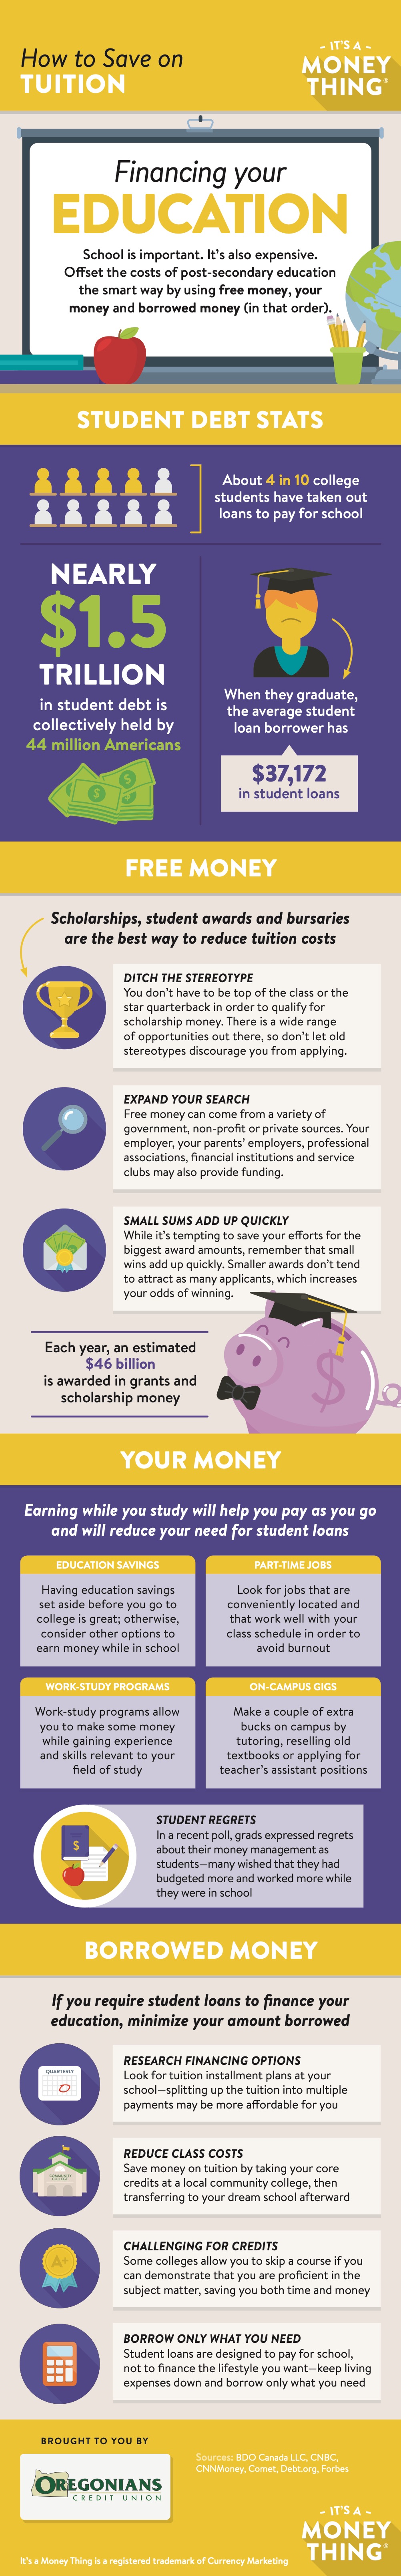 How to save on tuition infographic